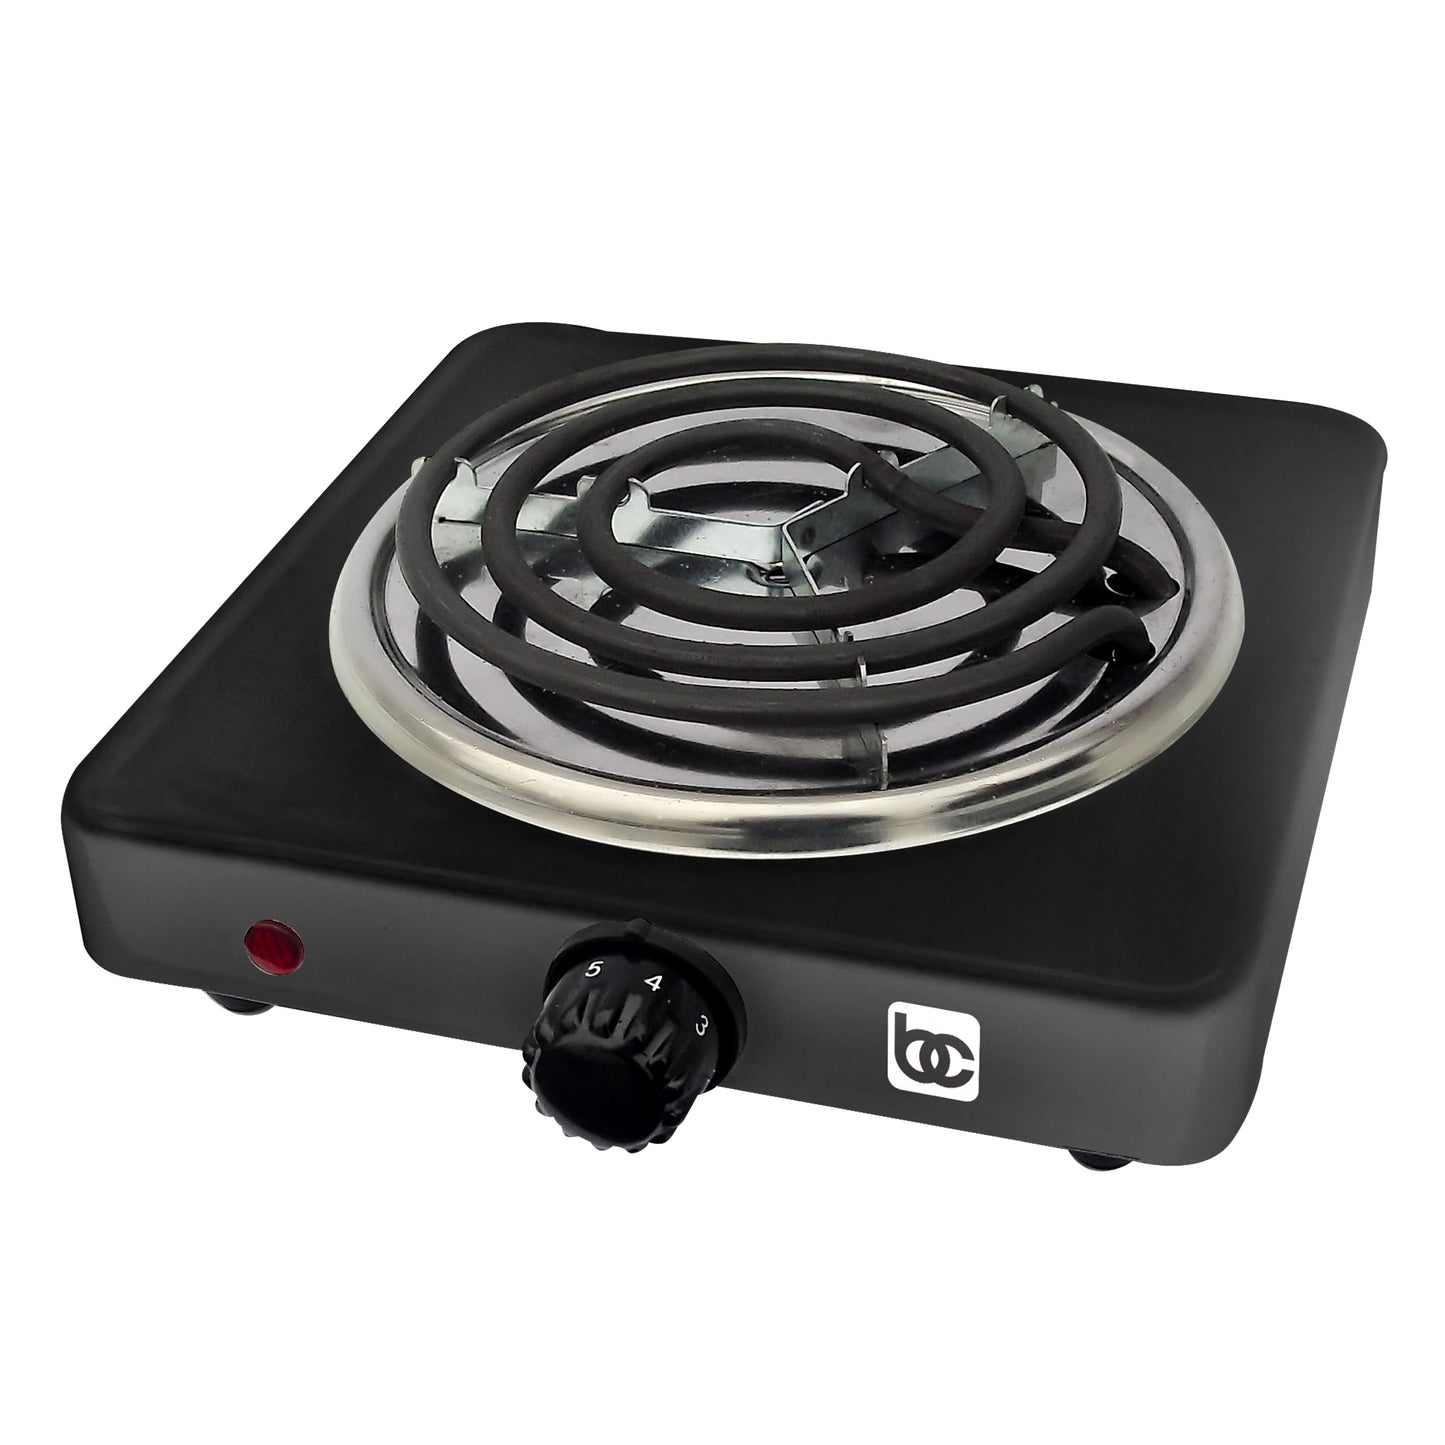 Portable Electric Single Burner Stove Hot Plate 1000W Cooktop Cooker Outdoor